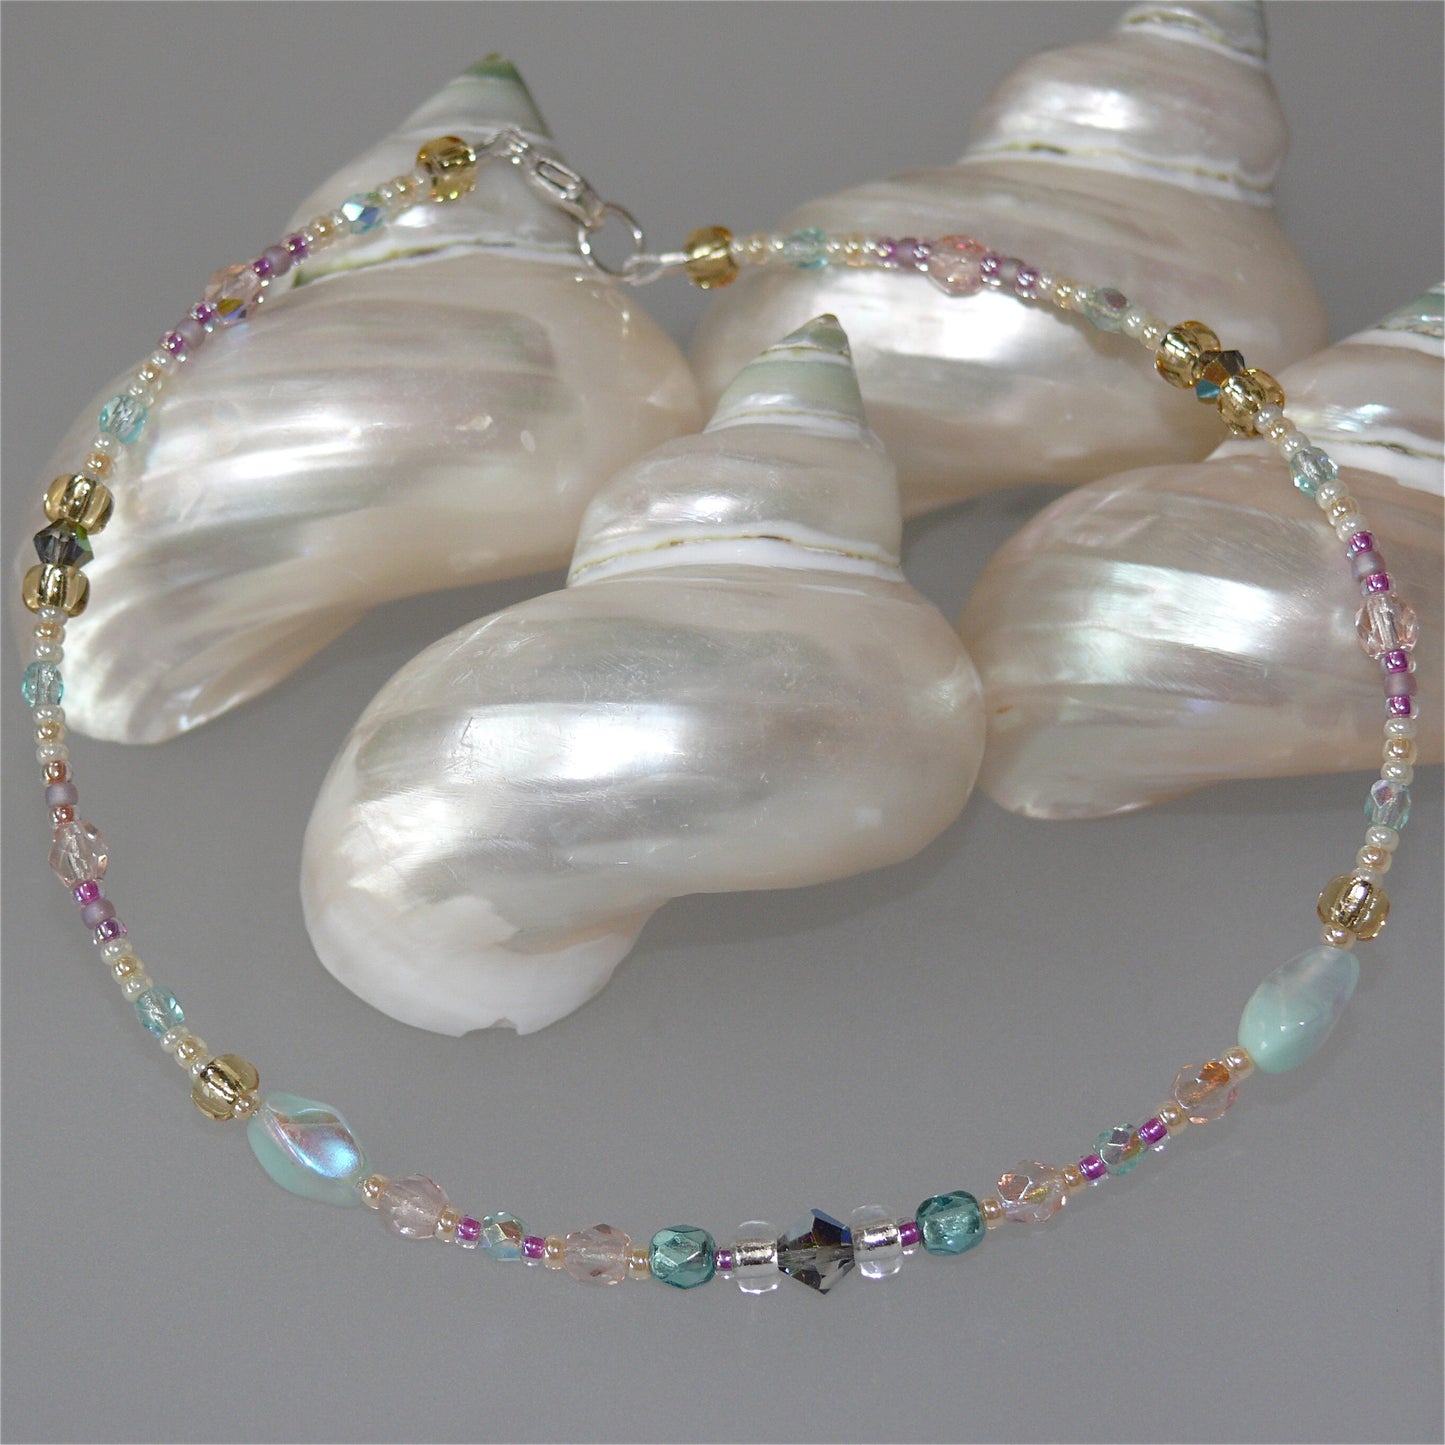 "Tranquil Waters" Ankle Bracelet by Arpaia Lang from Mystical Mermaid Reflections Collection